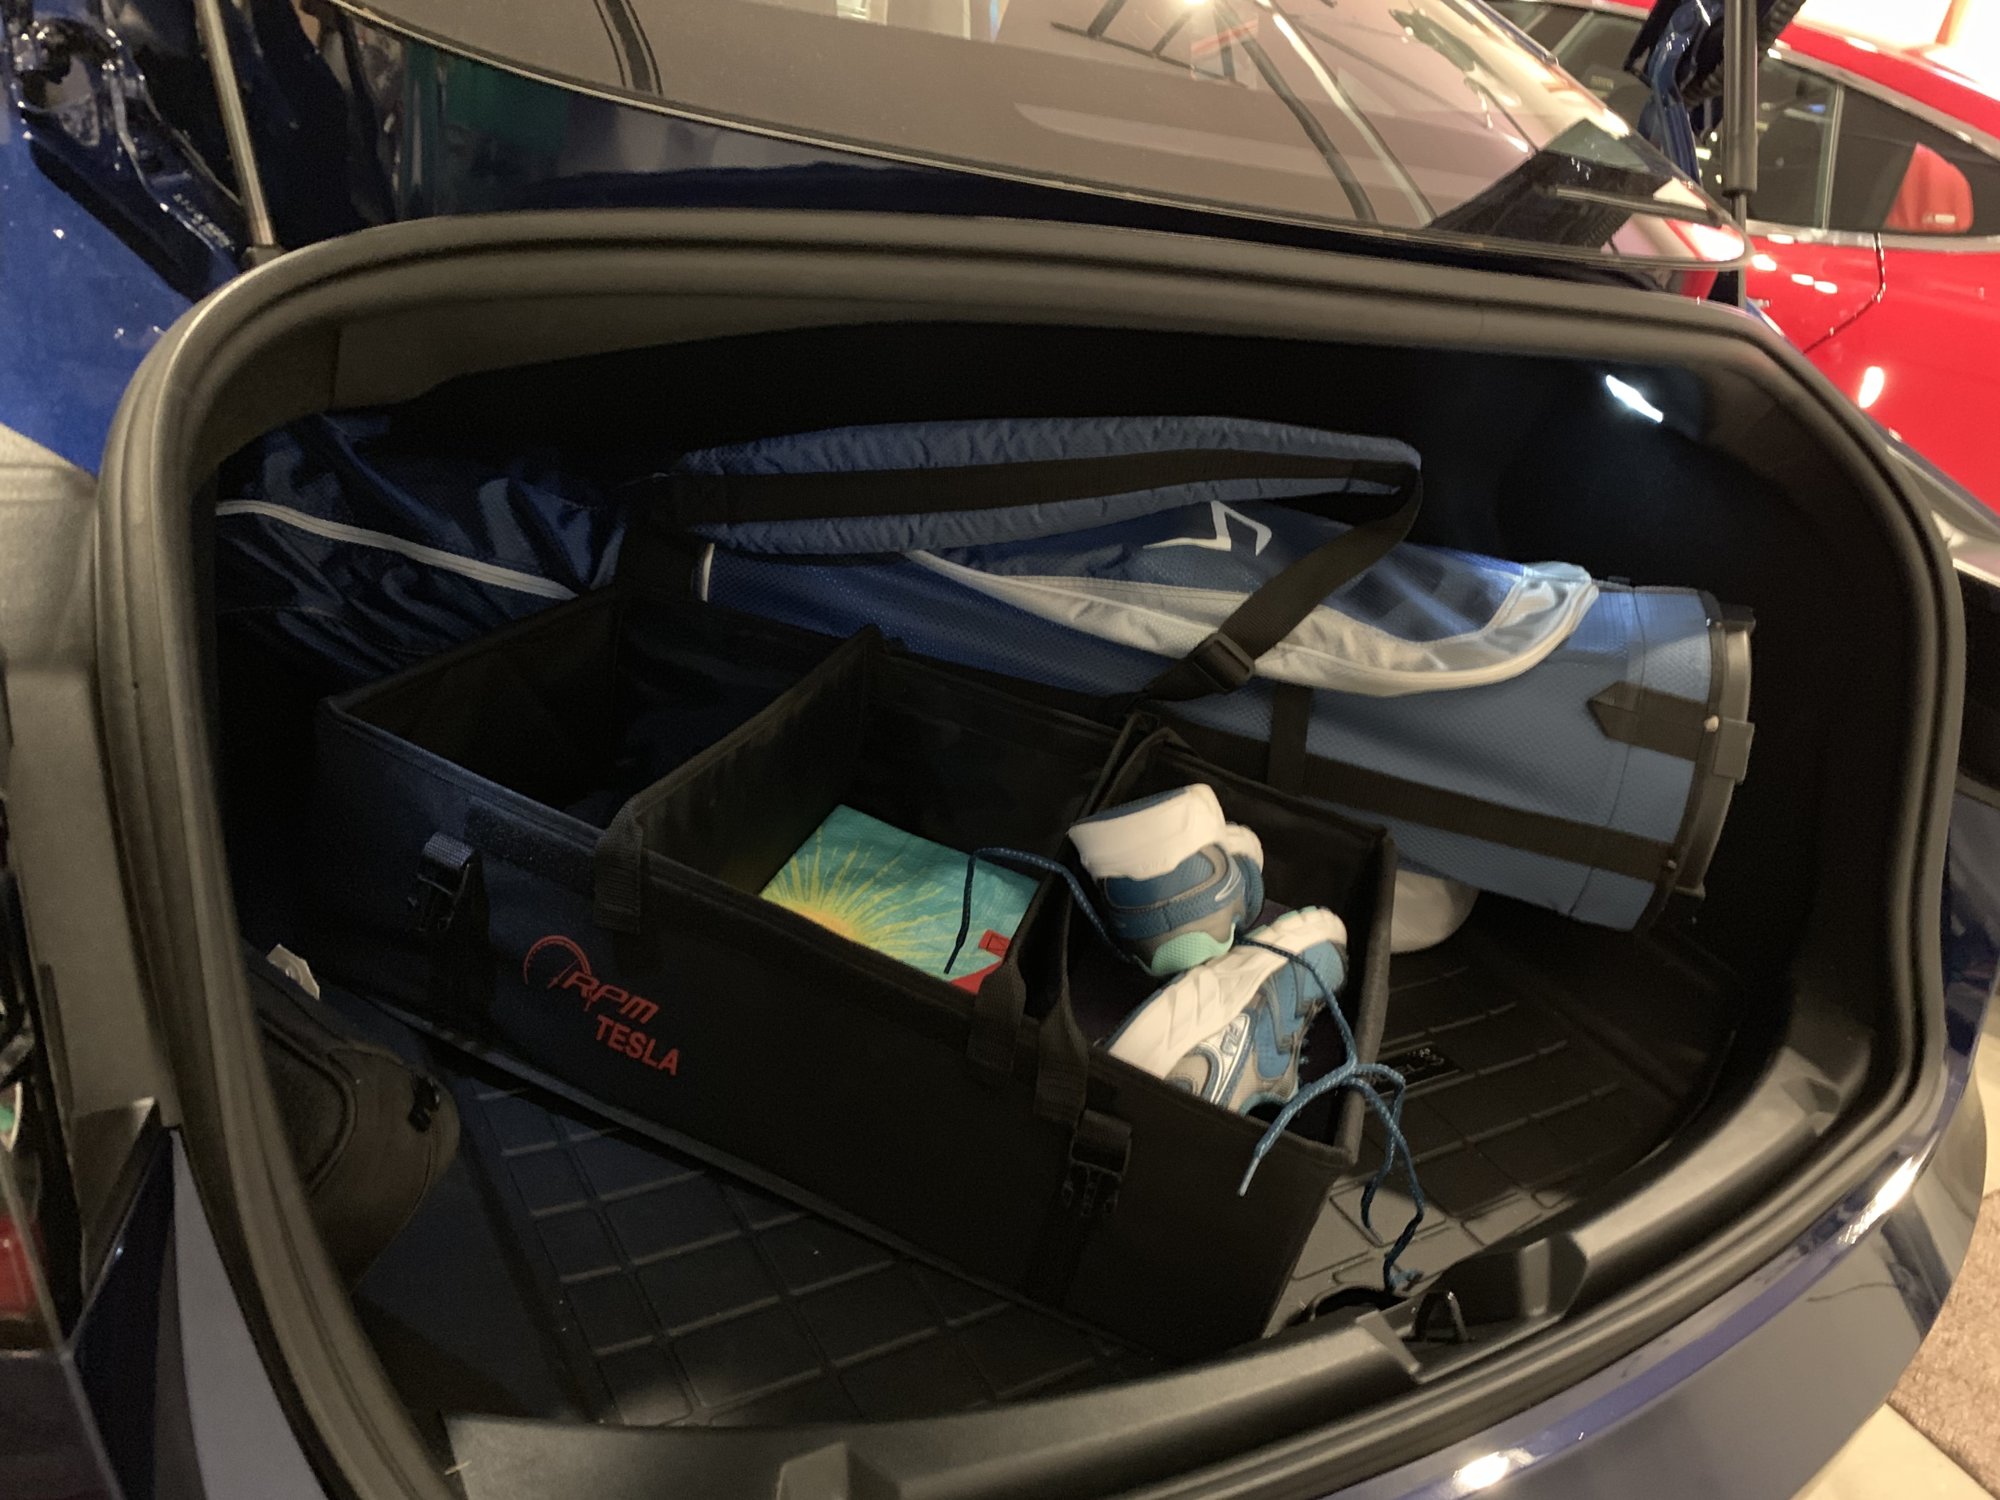 Golf clubs + clicgear 3.5 fit in the trunk? | Tesla Motors Club